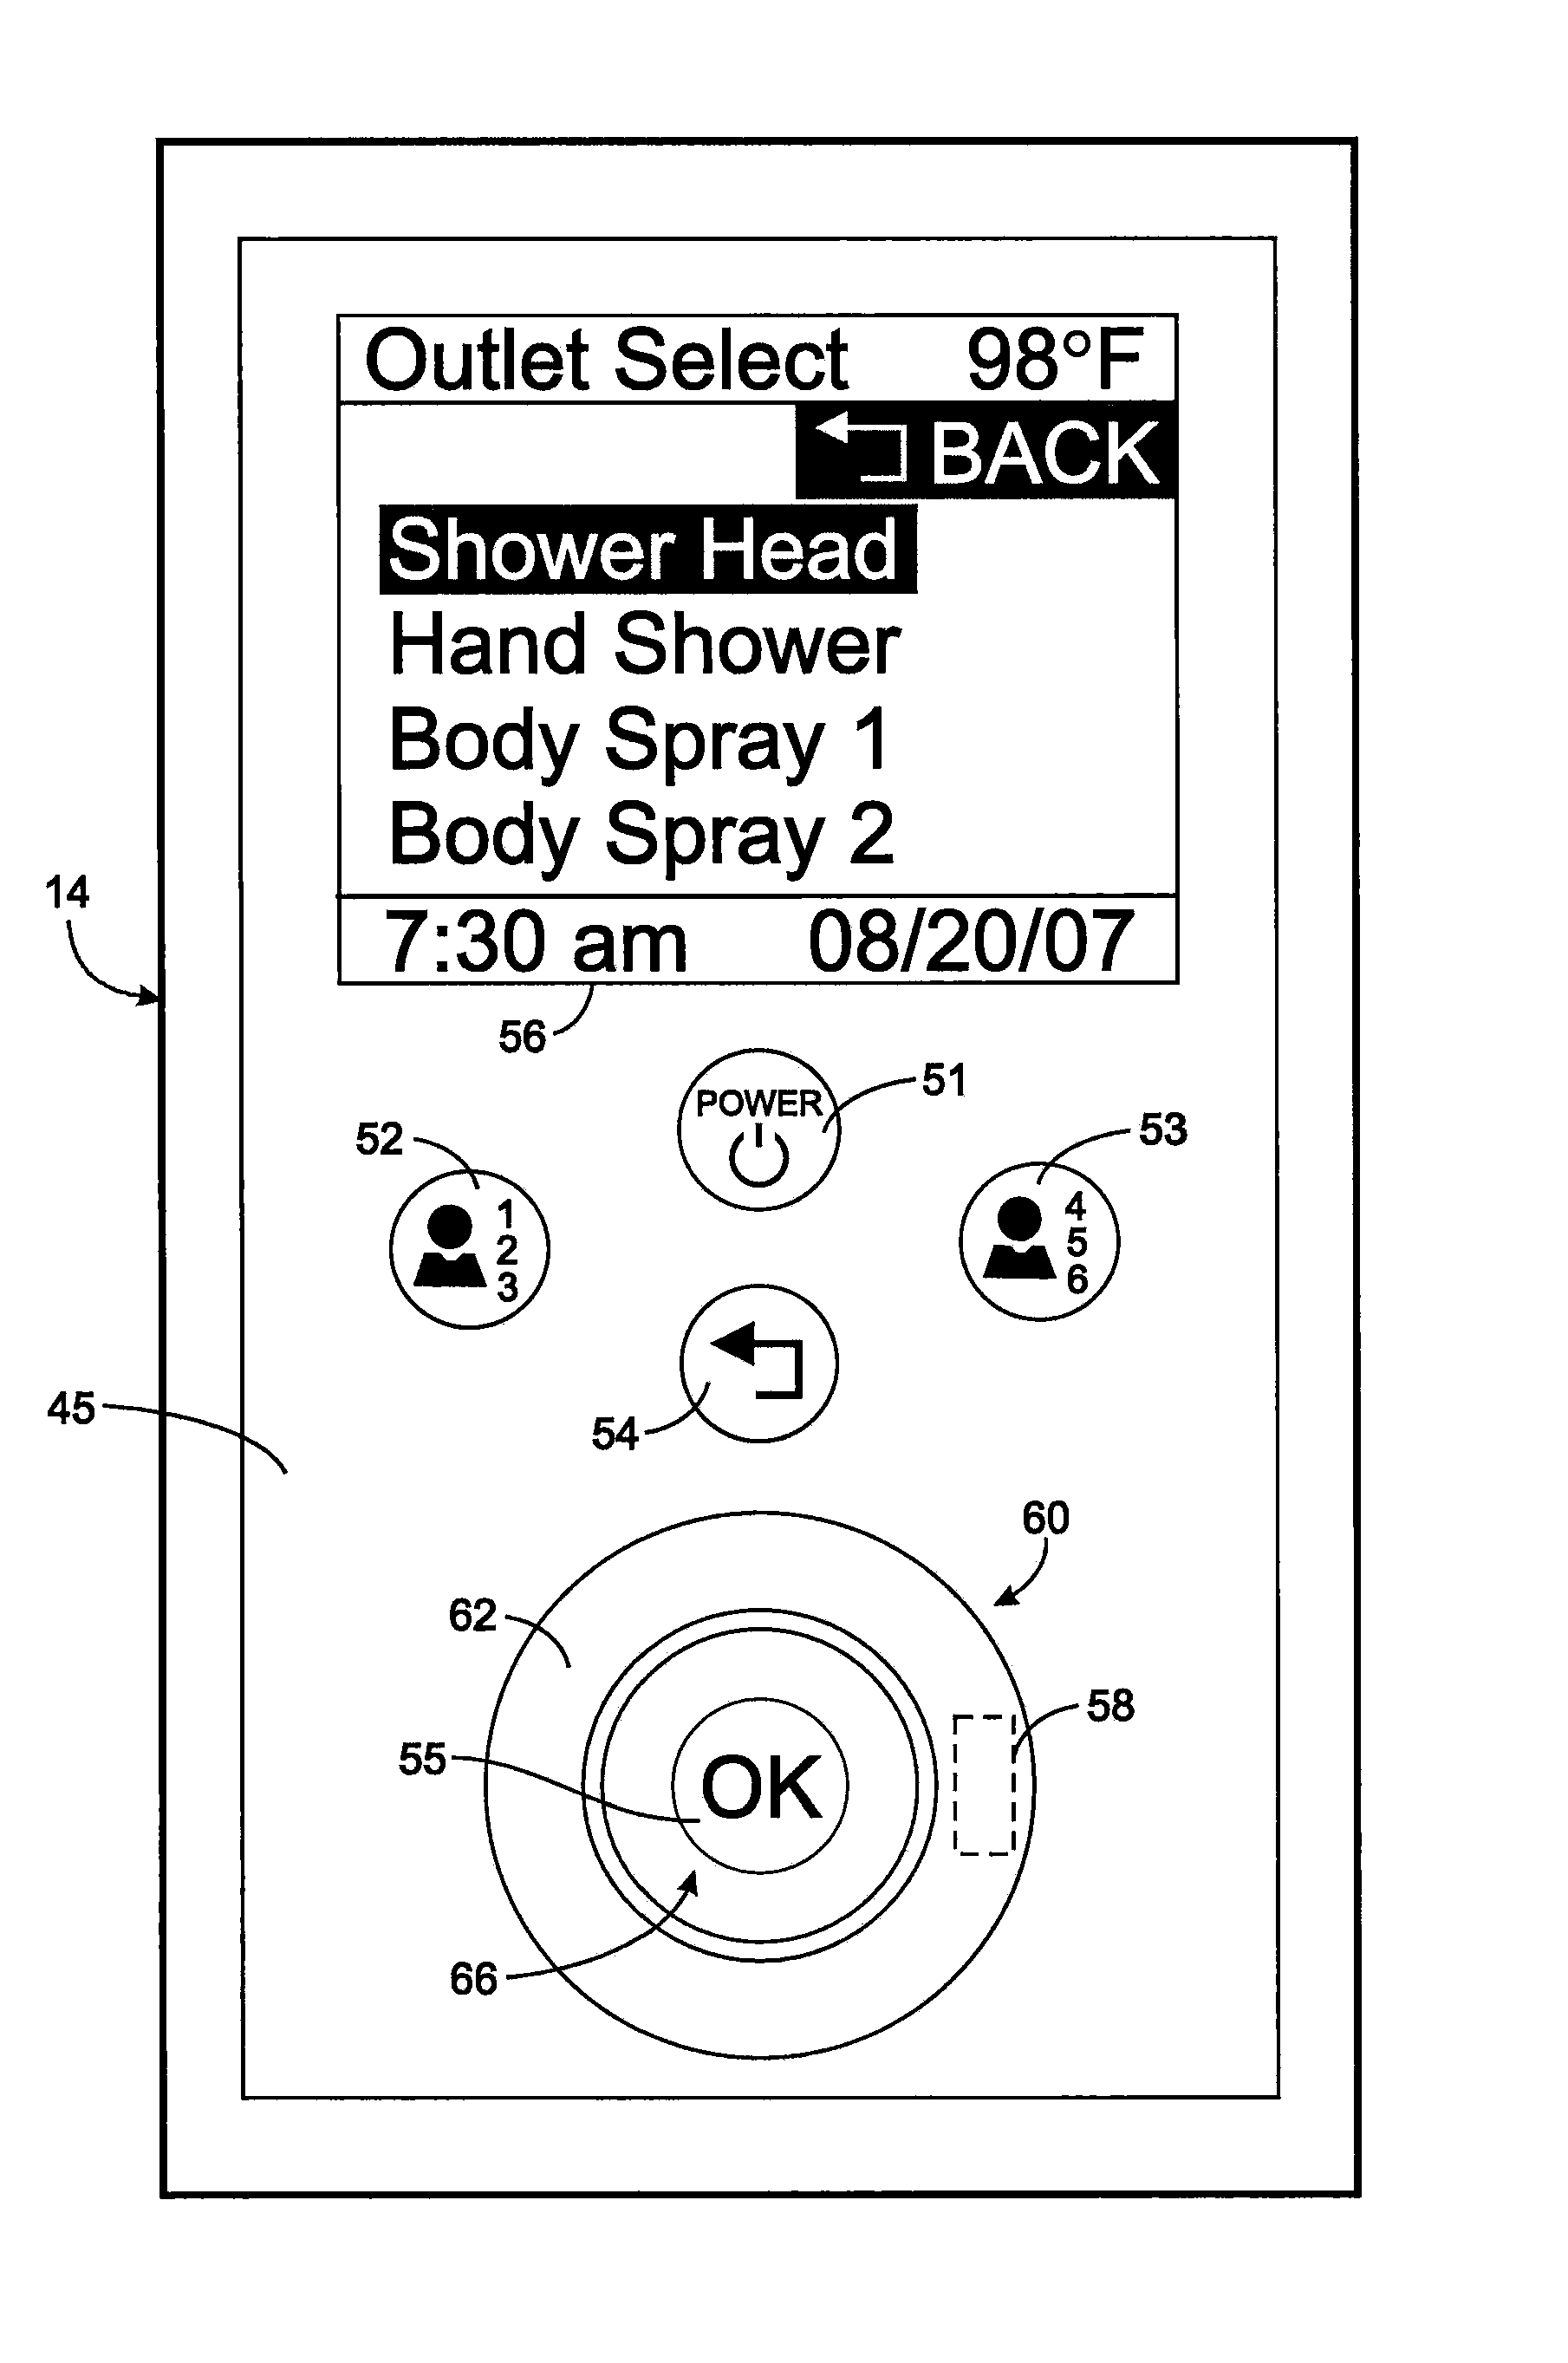 User interface for controlling a bathroom plumbing fixture